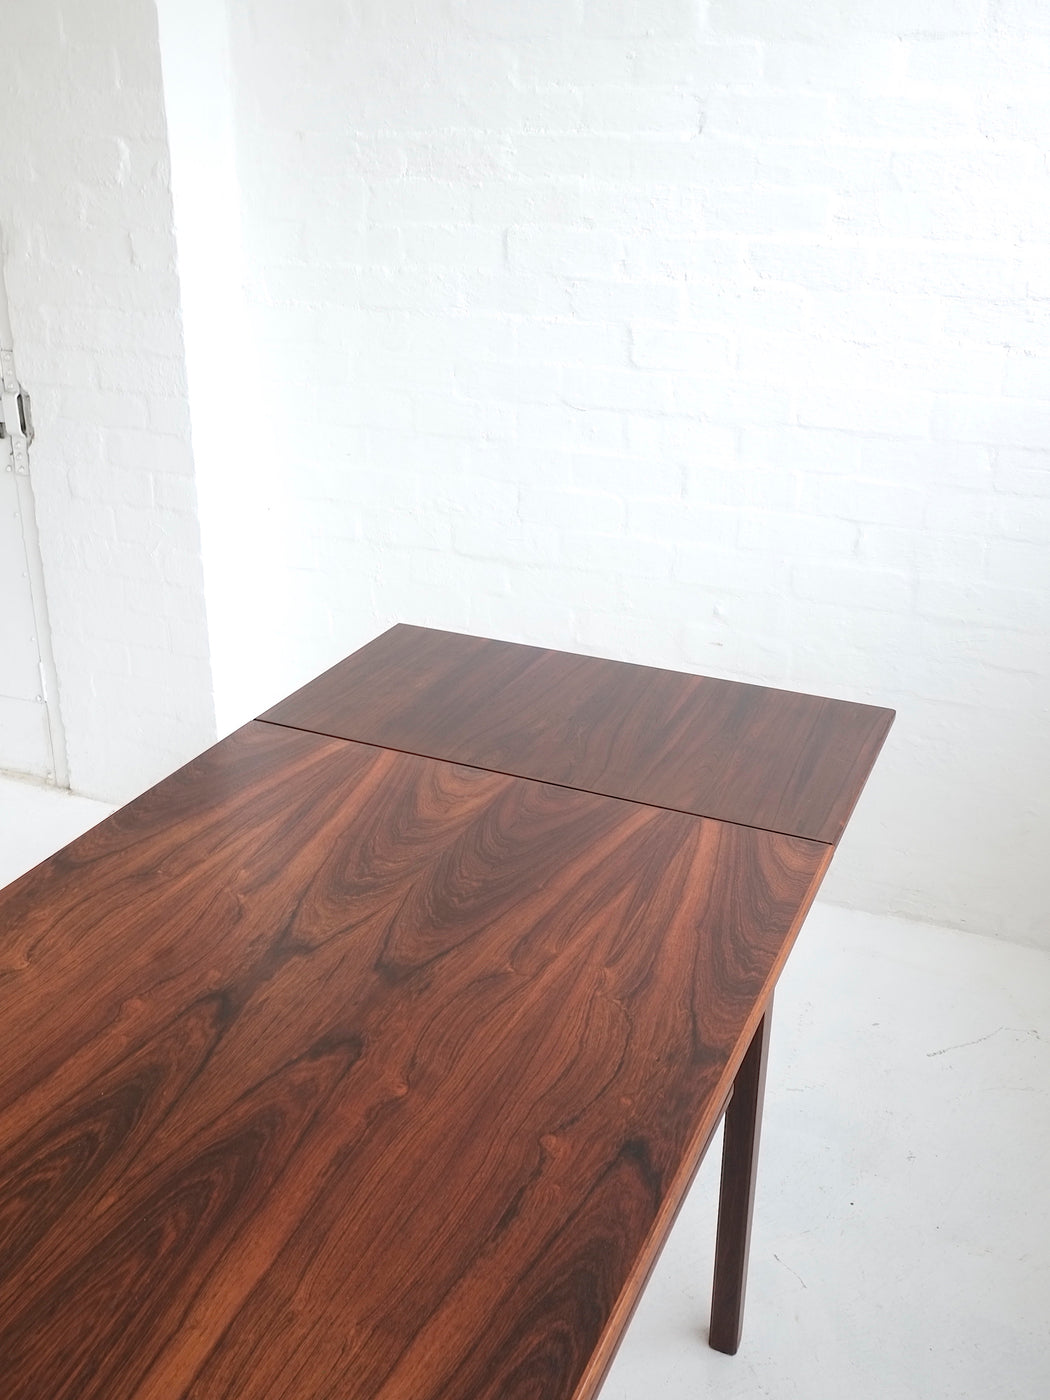 Danish Rosewood Extension Dining Table